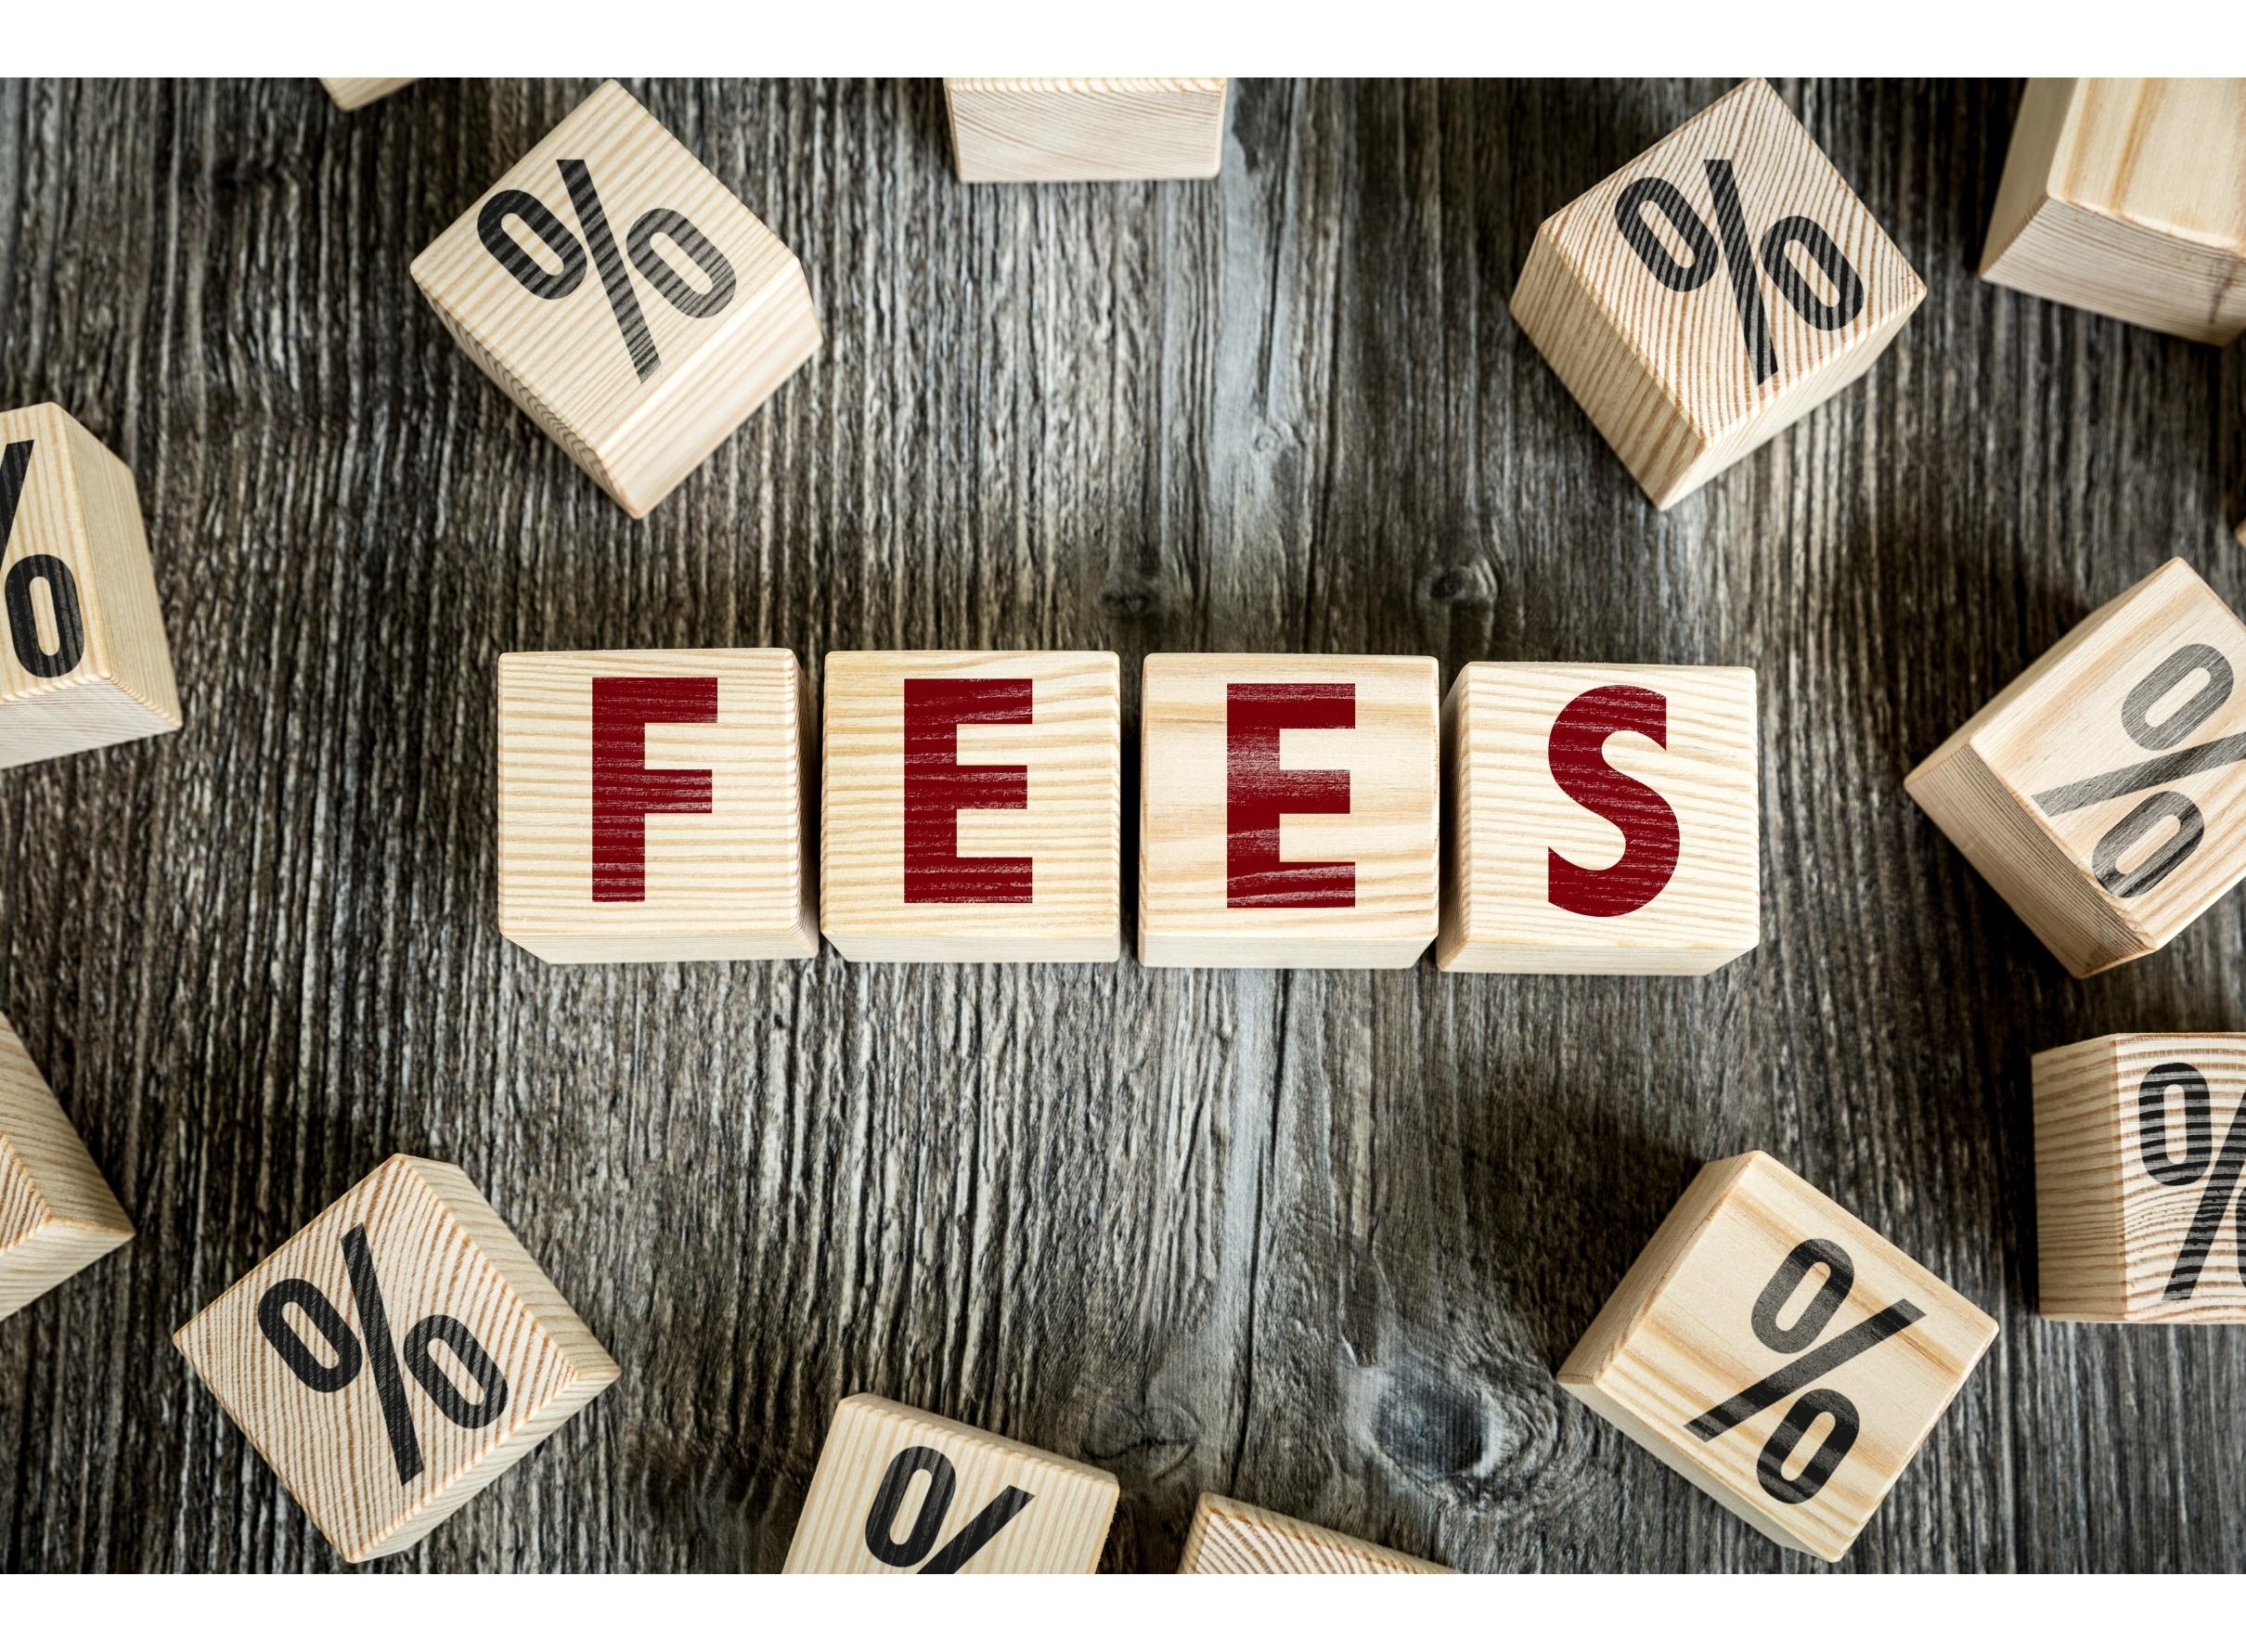 The word “Fees” and percentage symbols referencing cannabis delivery service fees.